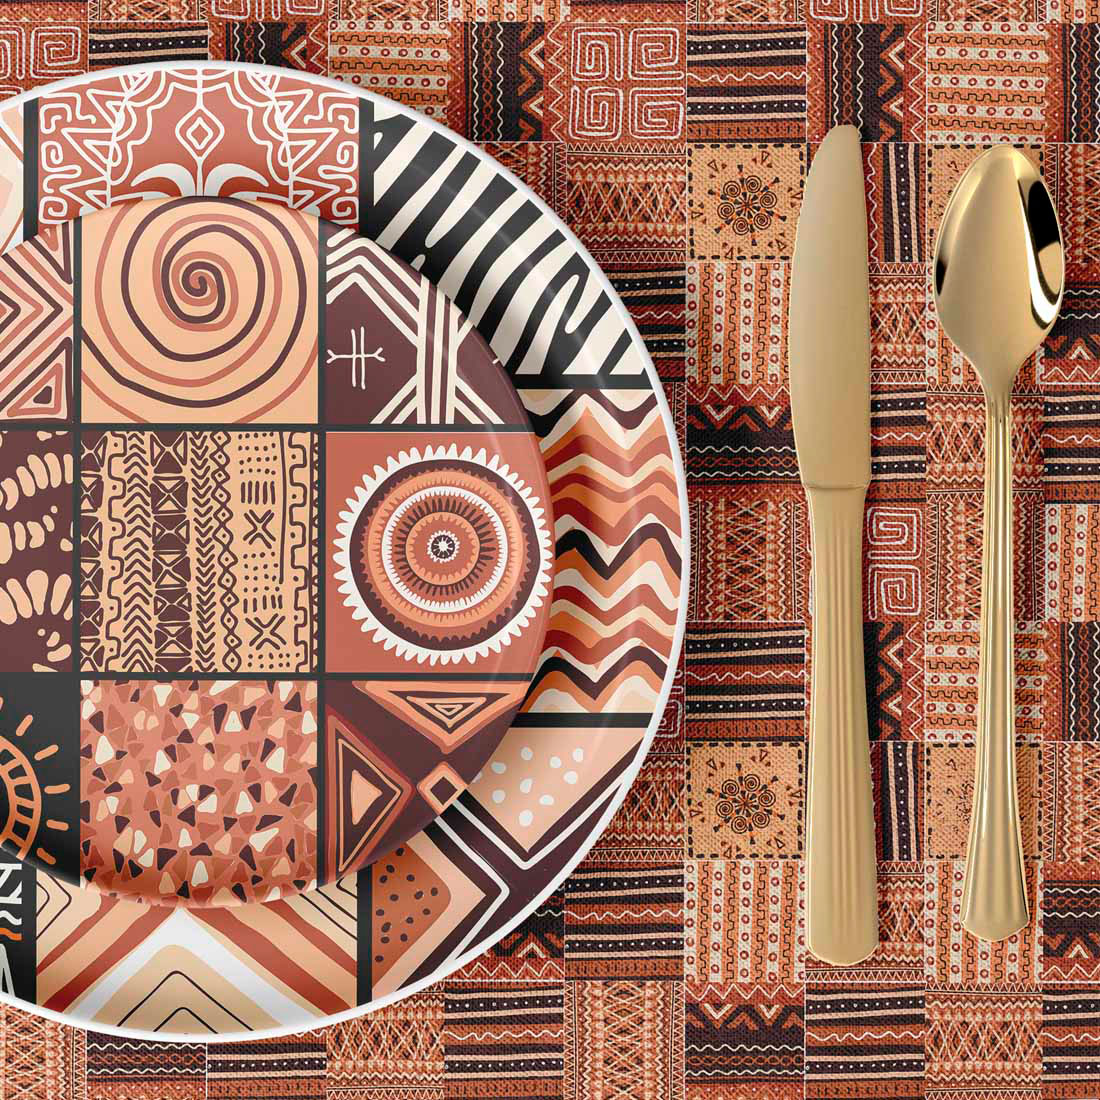 Image of tableware with gorgeous patterns in African style.